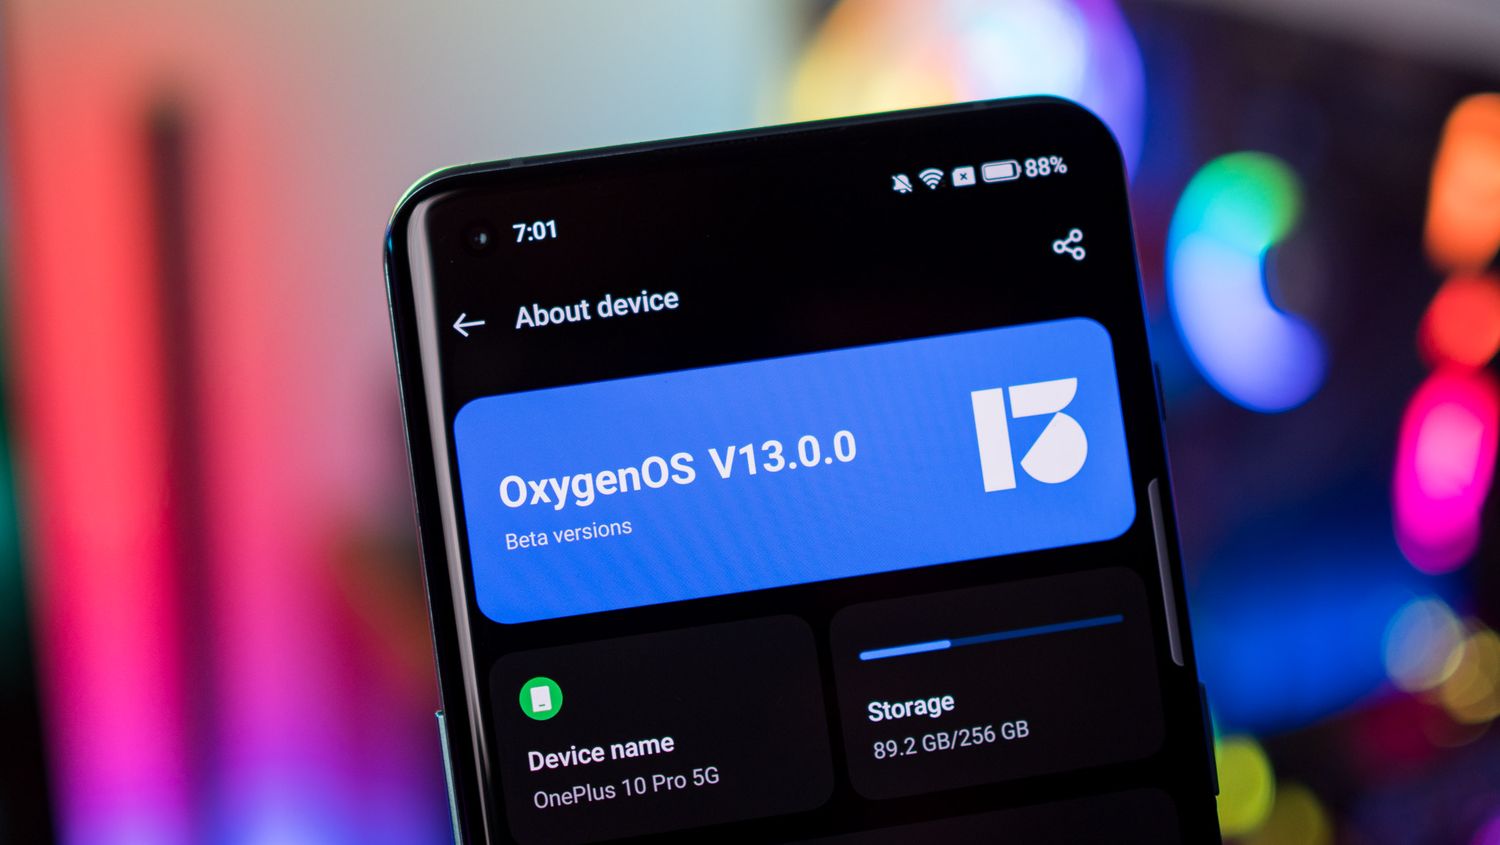 oneplus-tells-us-about-oxygenos-13-and-the-phones-getting-it